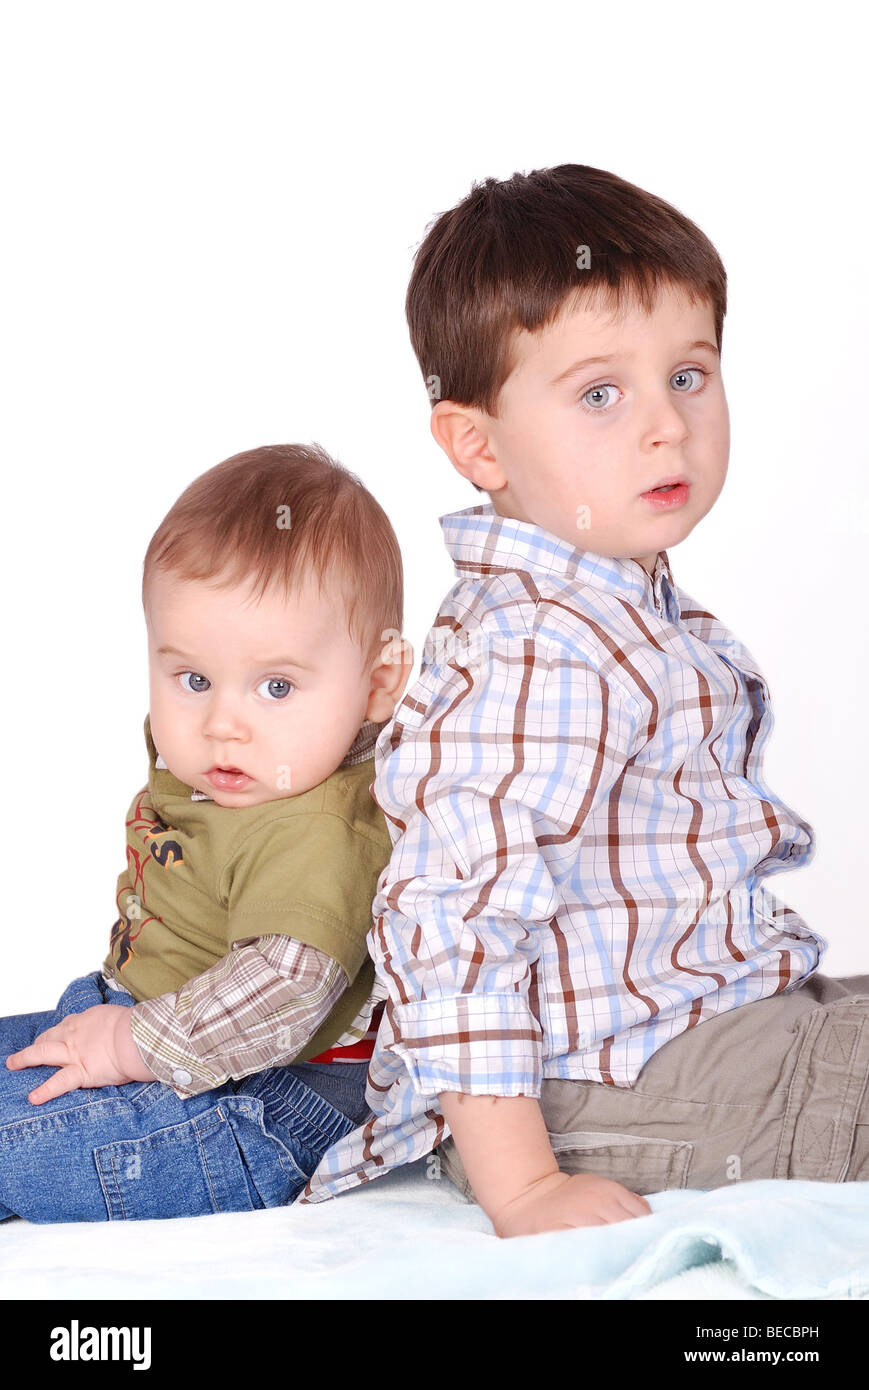 Two boys -baby and child - brothers, portrait on the white background Stock Photo